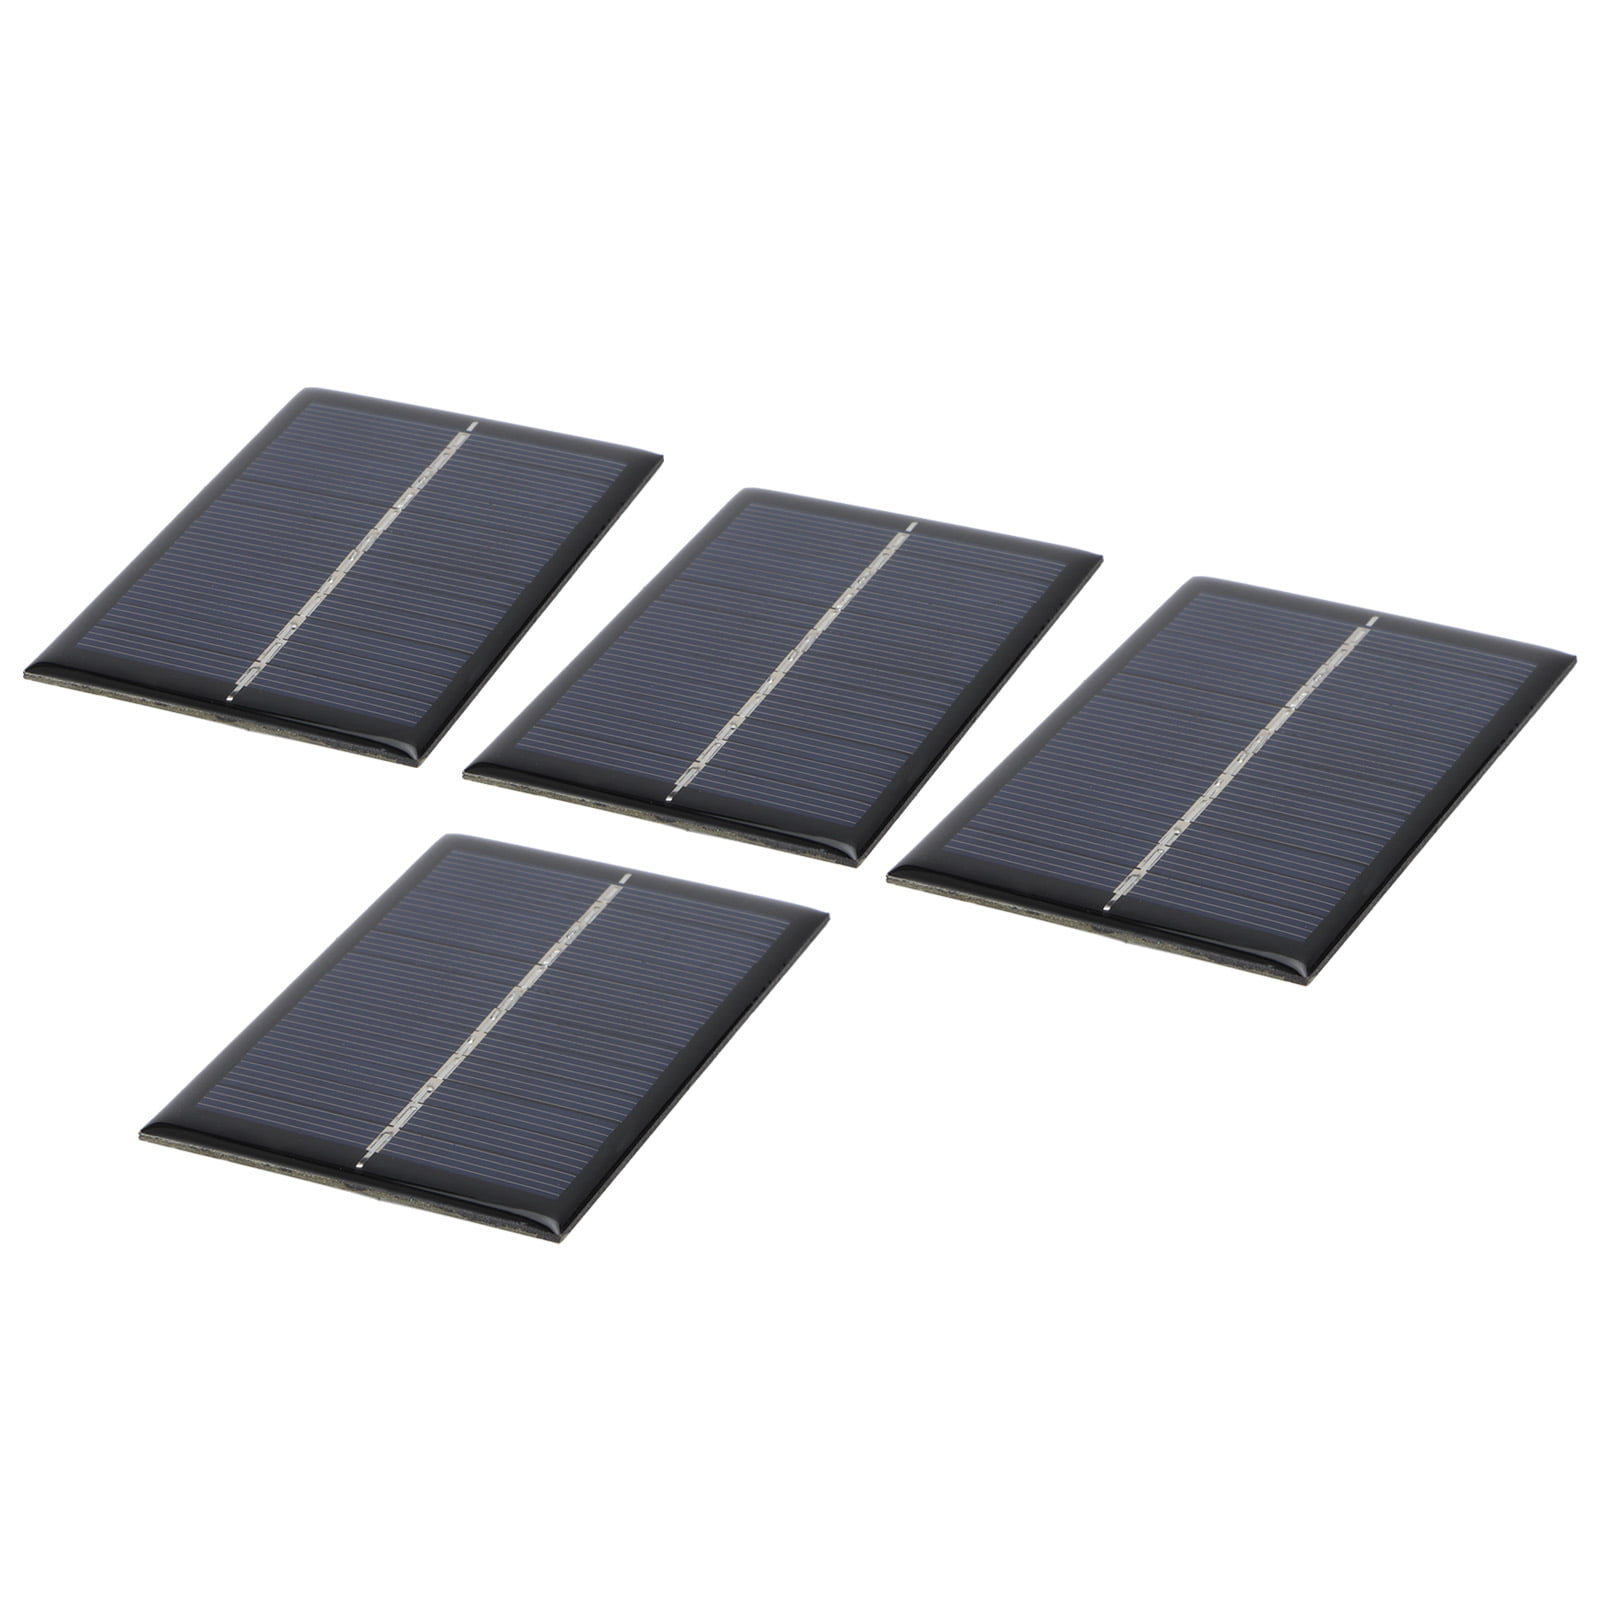 3.5x2.4in Fdit Solar Panel 4PCS 0.6W 6V Mini Solar Panel Module Photovoltaic Solar Cells Outdoor Compression Resistance Camping Battery Charger DIY Parts 